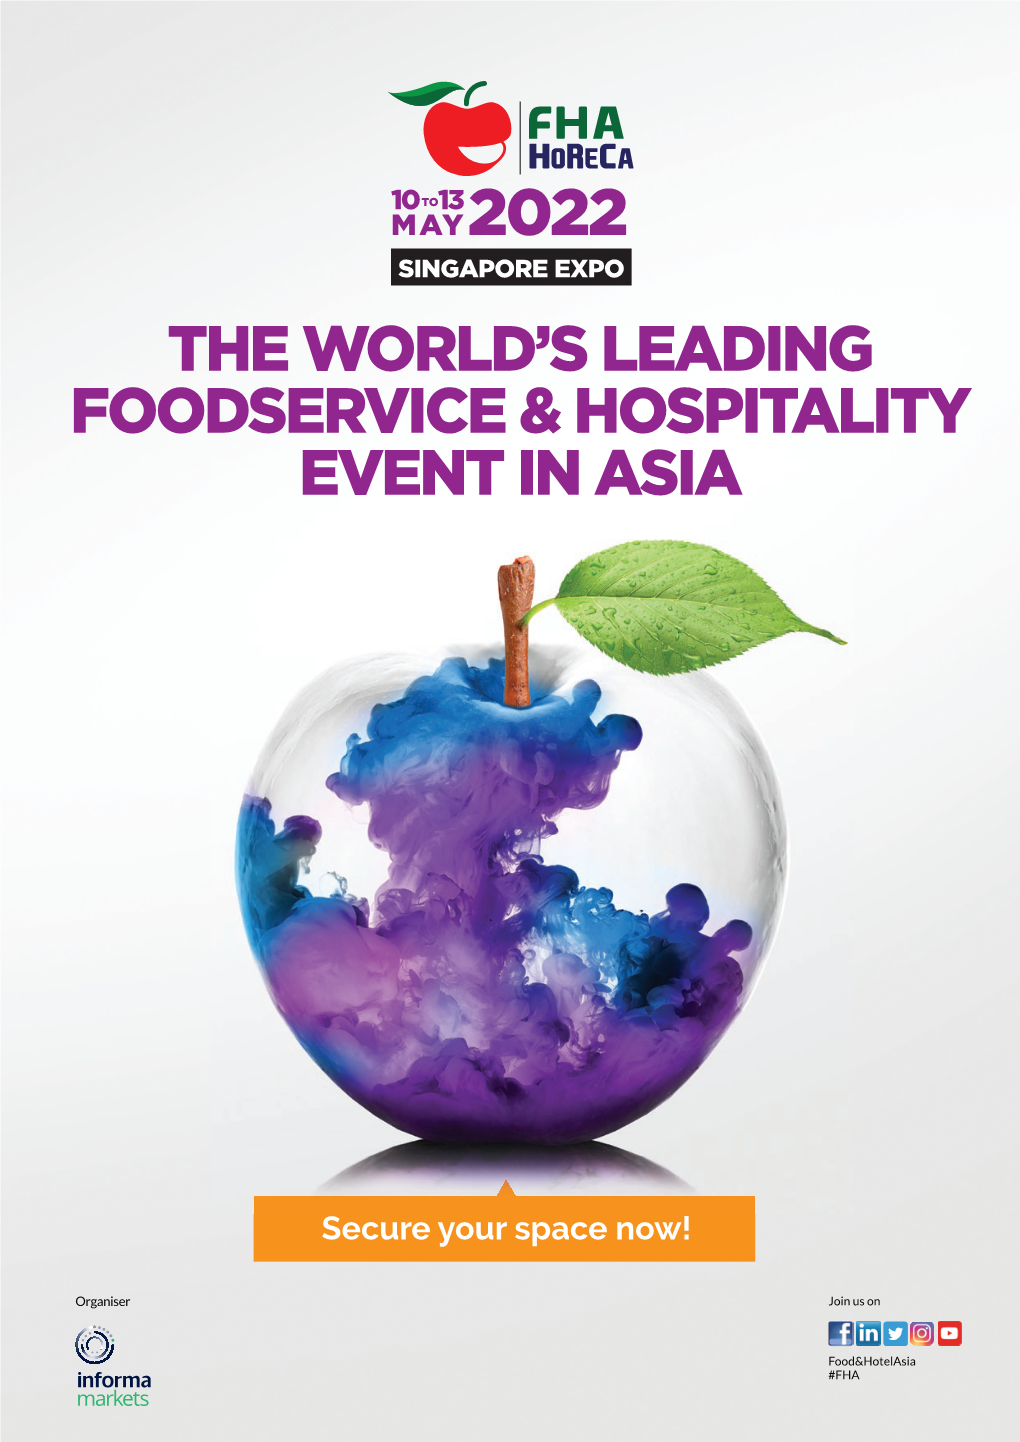 The World's Leading Foodservice & Hospitality Event